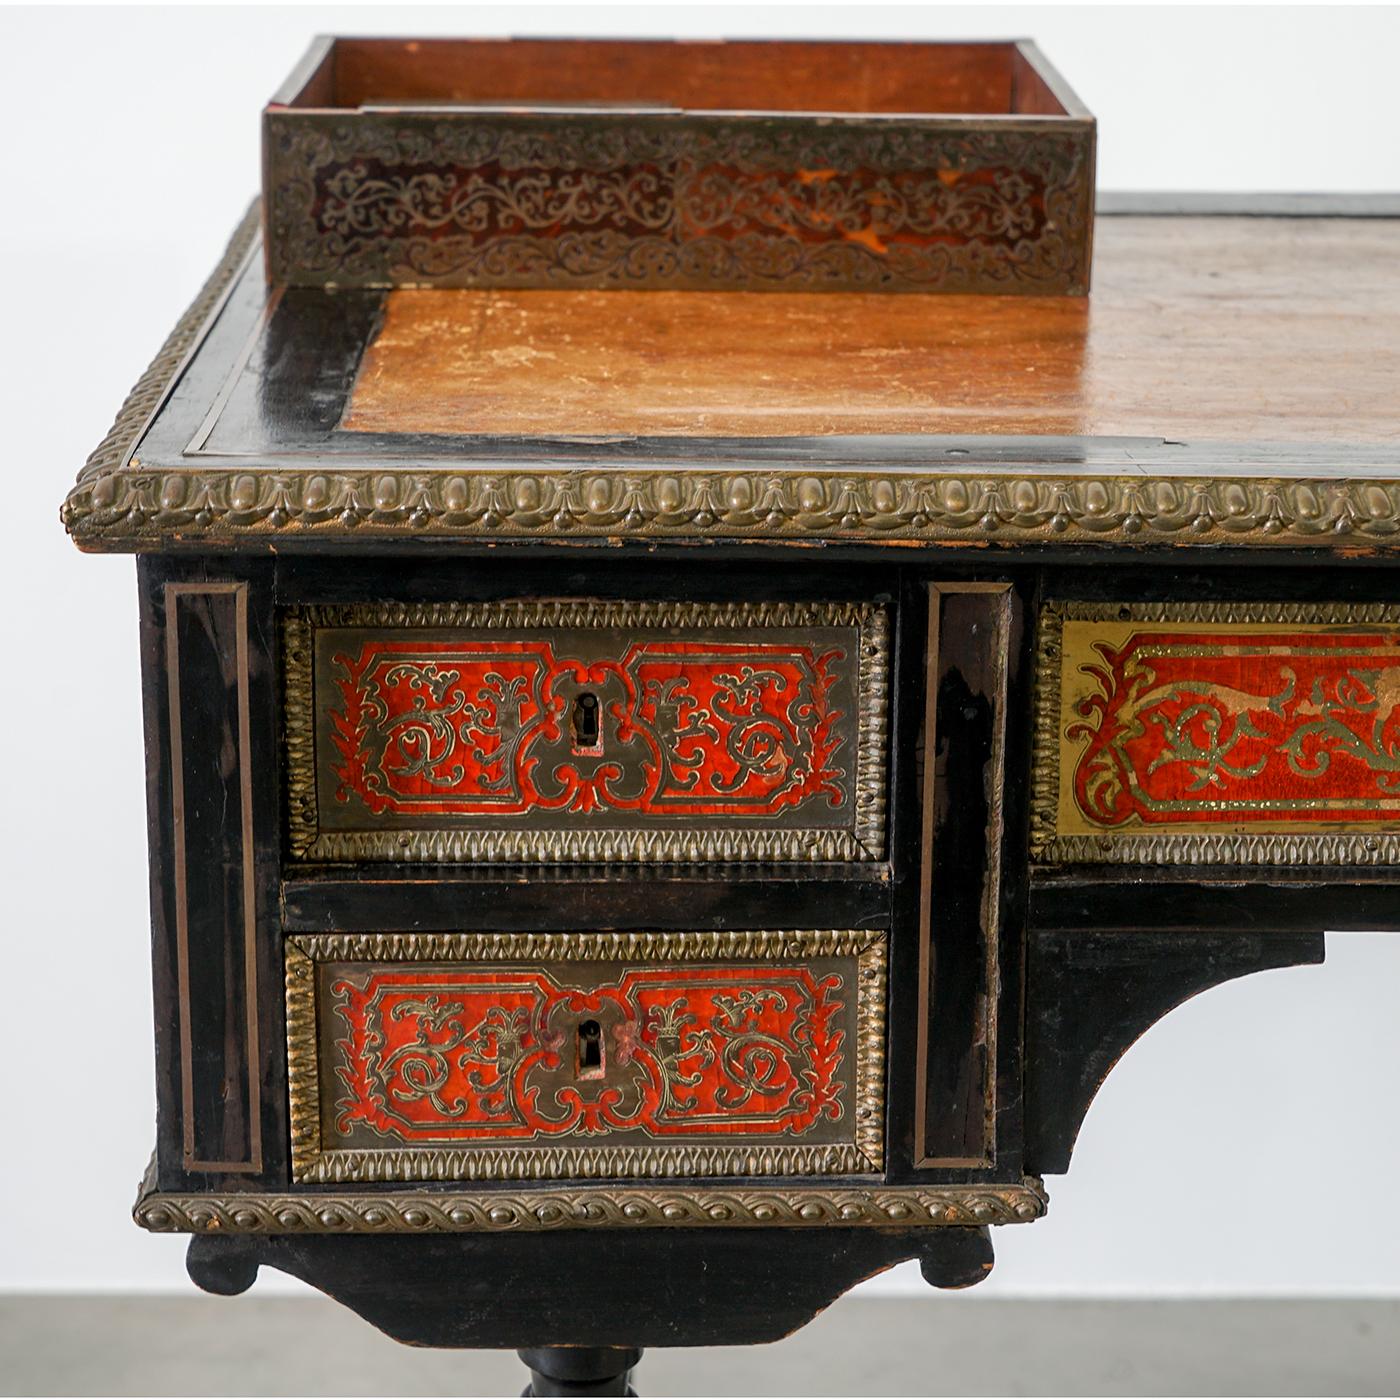 This beautiful second generation desk in Boulle marquetry was produced in France in the 19th century. This unique piece is handmade from ebonized wood, each side with two side drawers and a wider drawer in the middle. The drawers are not in their